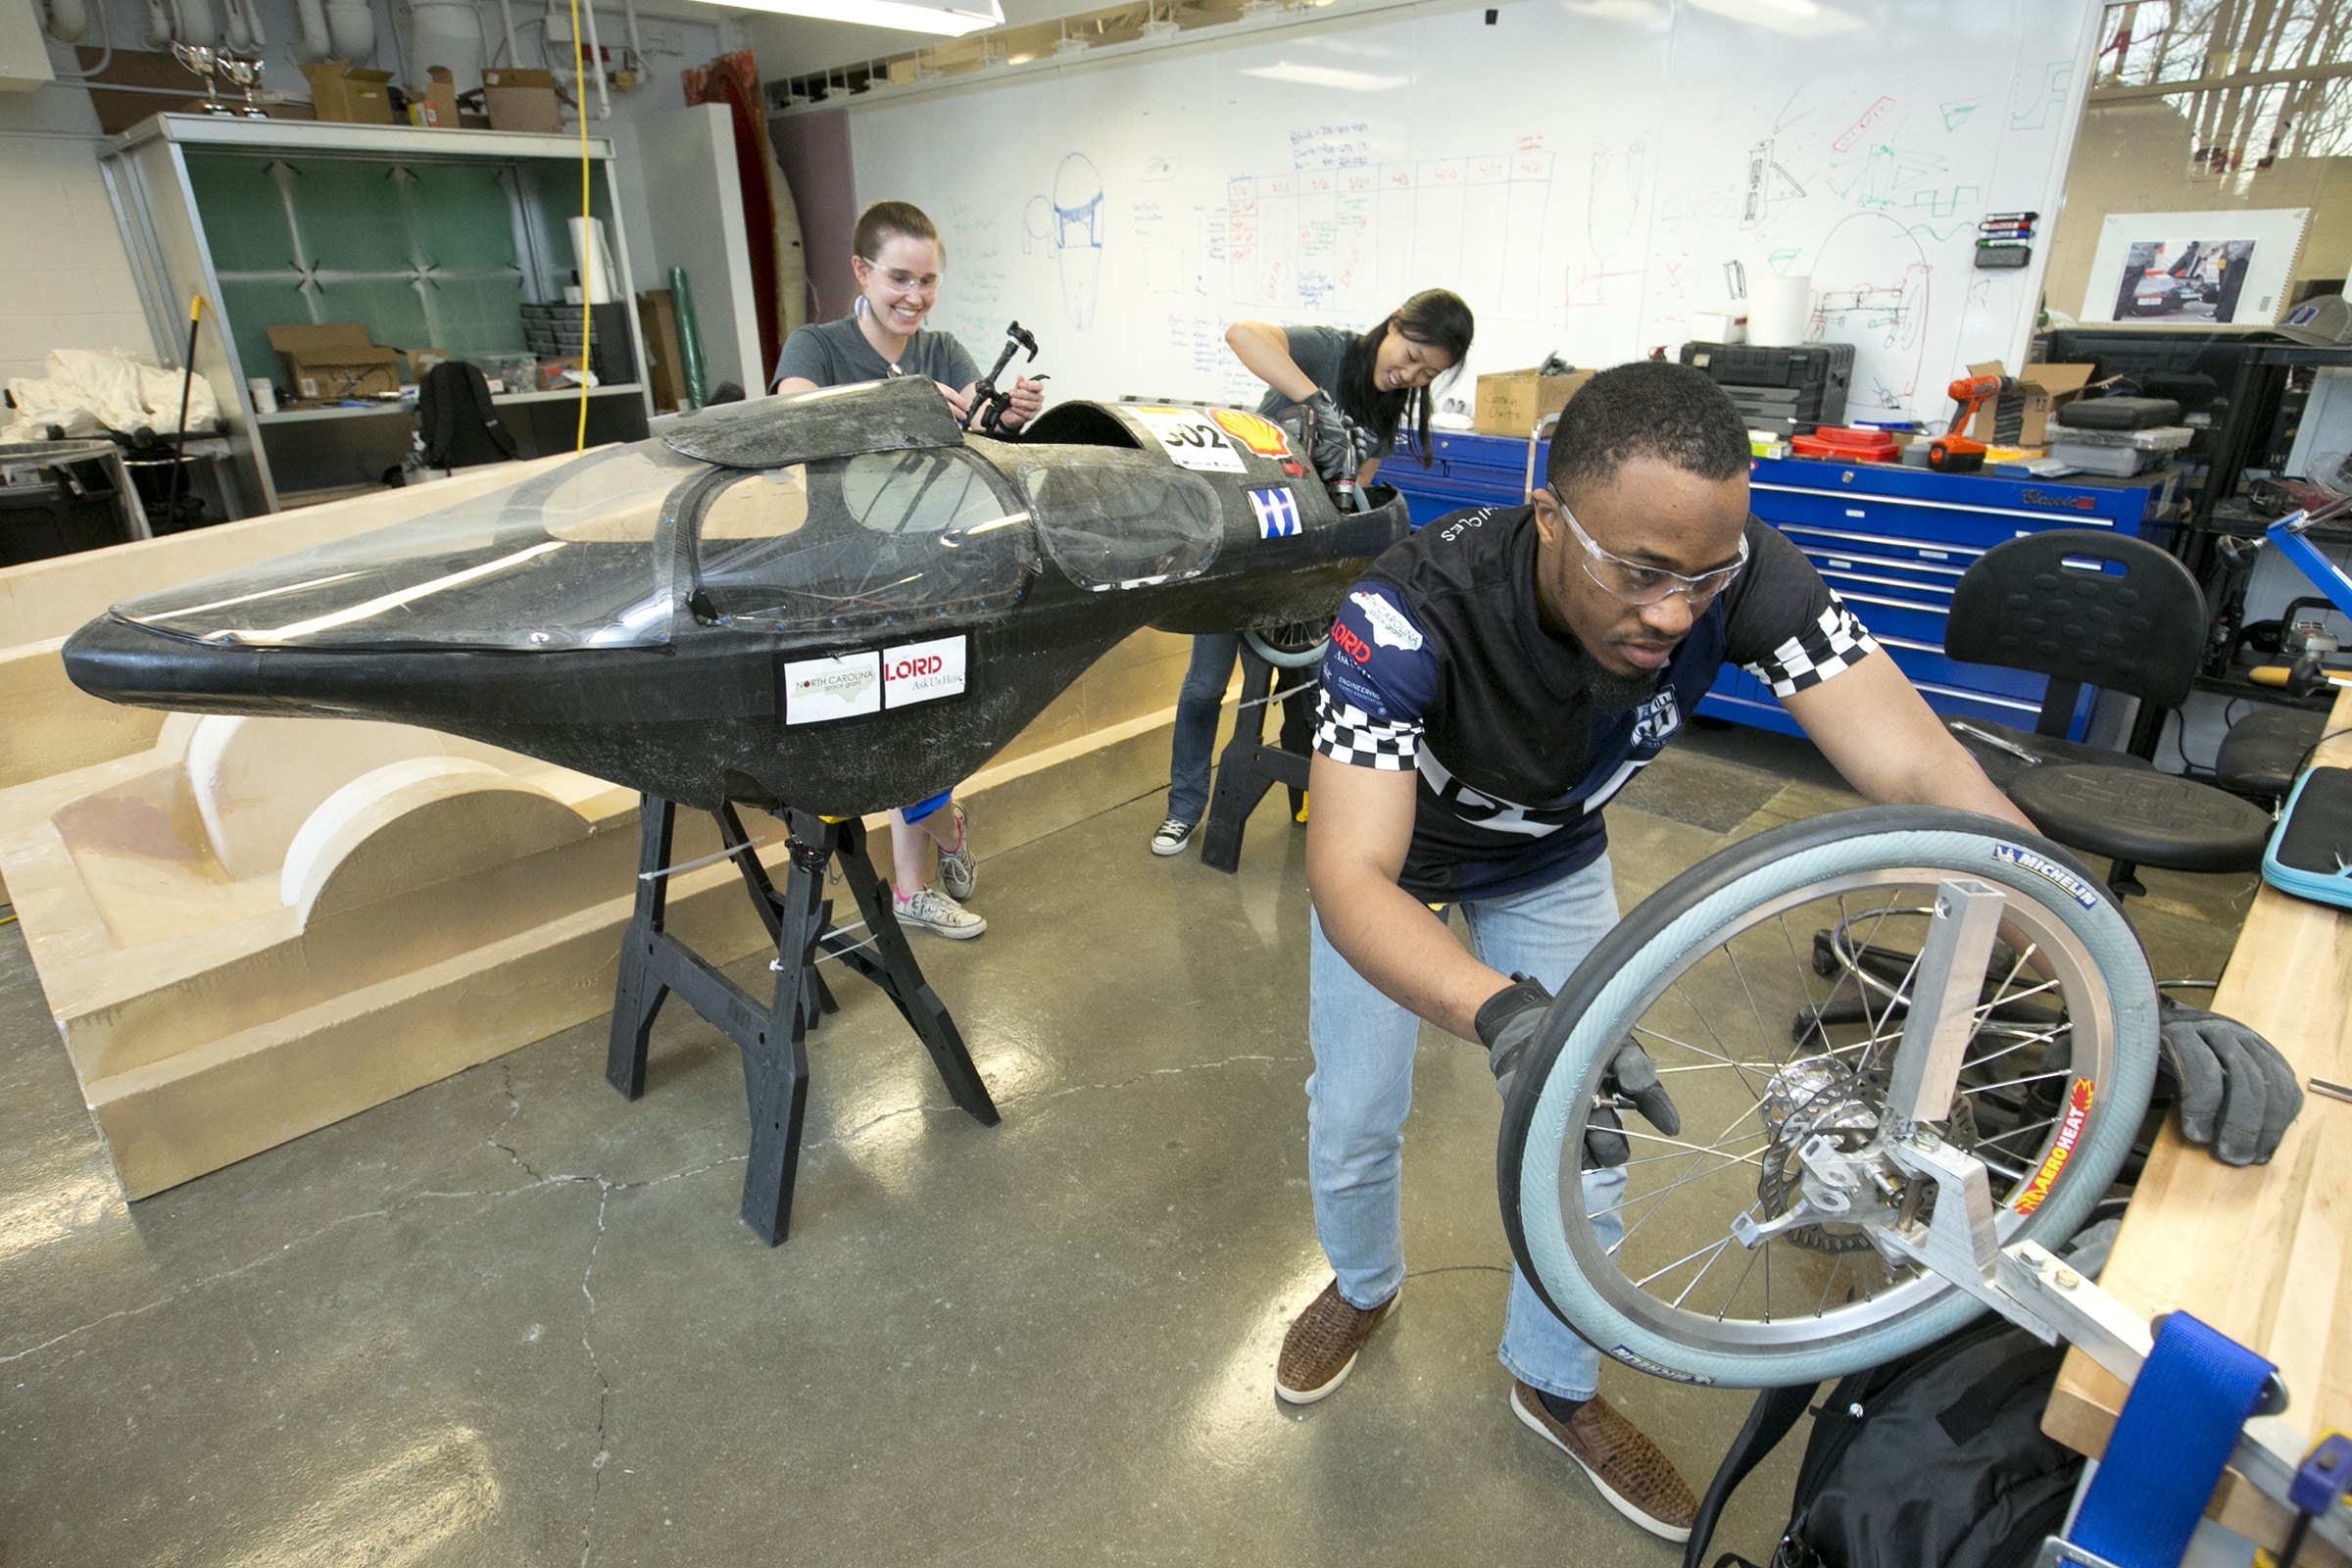 undergraduates work to build an electric powered vehicle for competitions